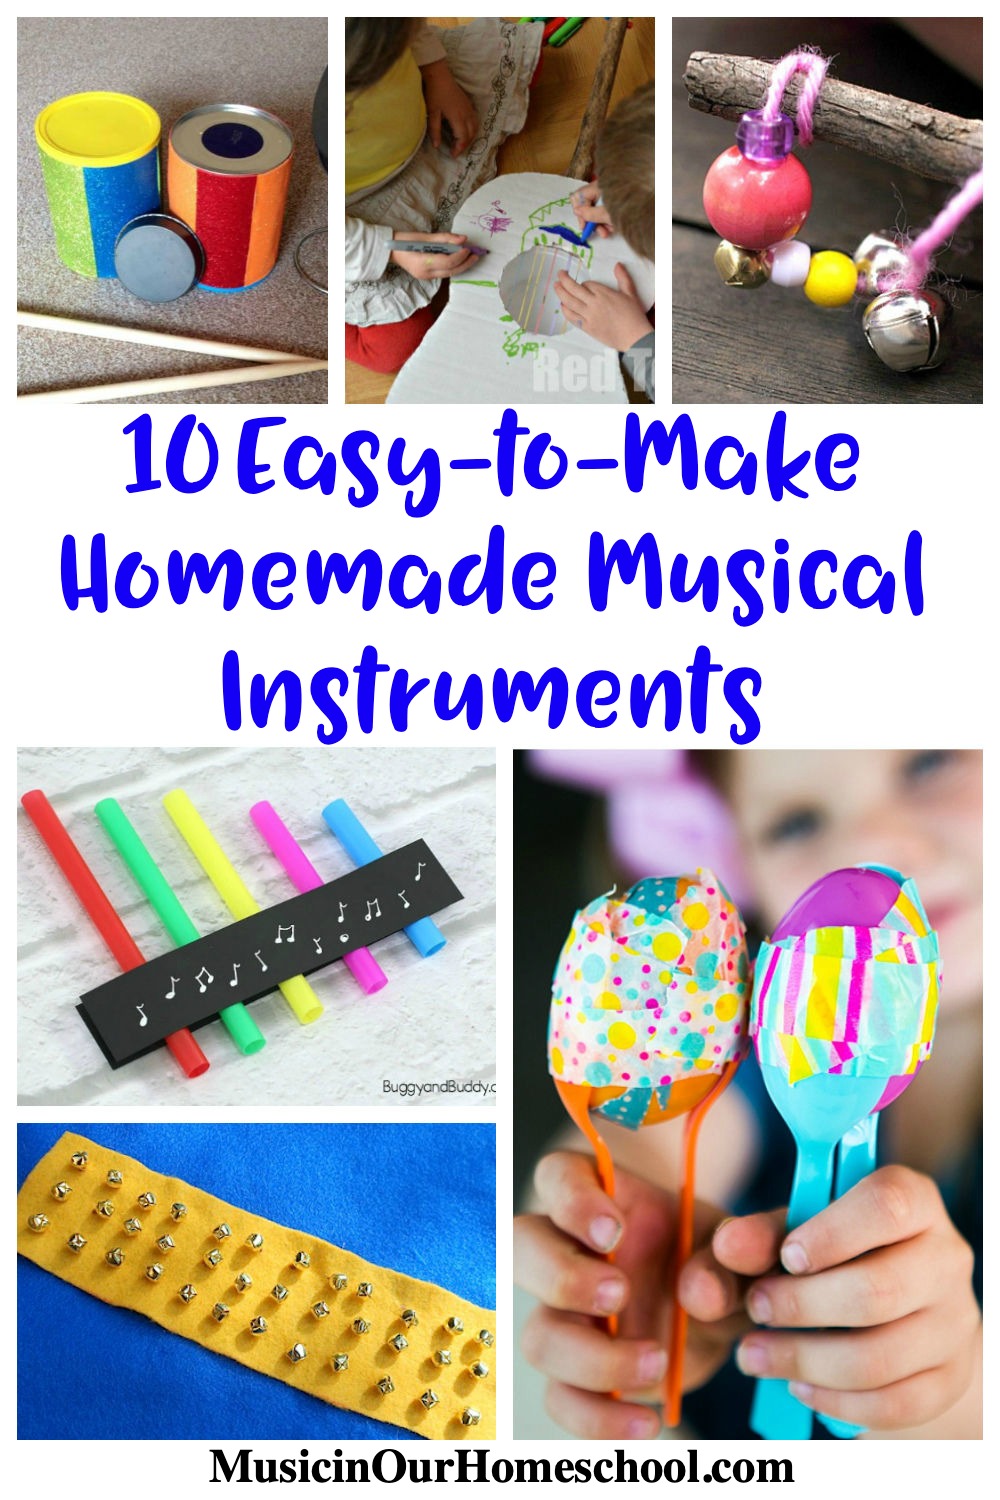 10 Easy-to-Make Homemade Musical Instruments from Music in Our Homeschool